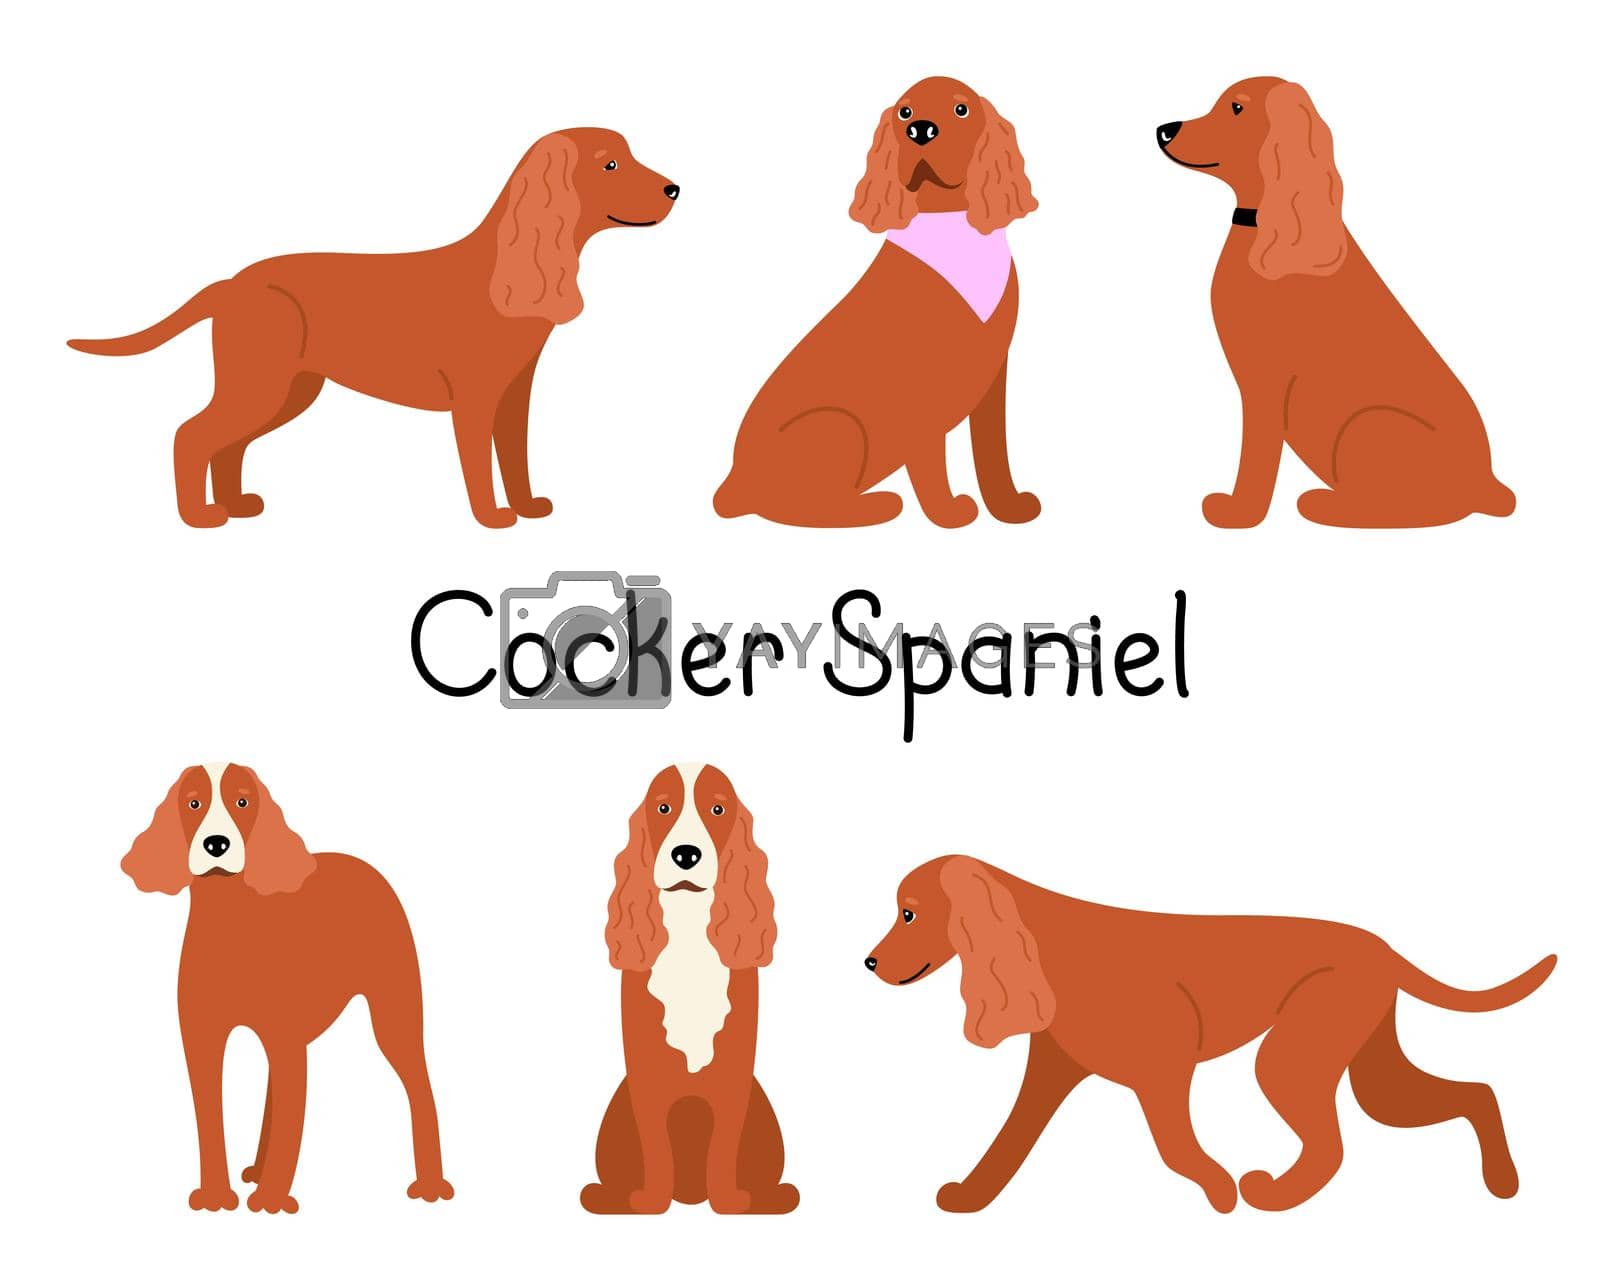 Royalty free image of Canine American or English Cocker Spaniel dog breed on a white background in different poses by lera_feeva